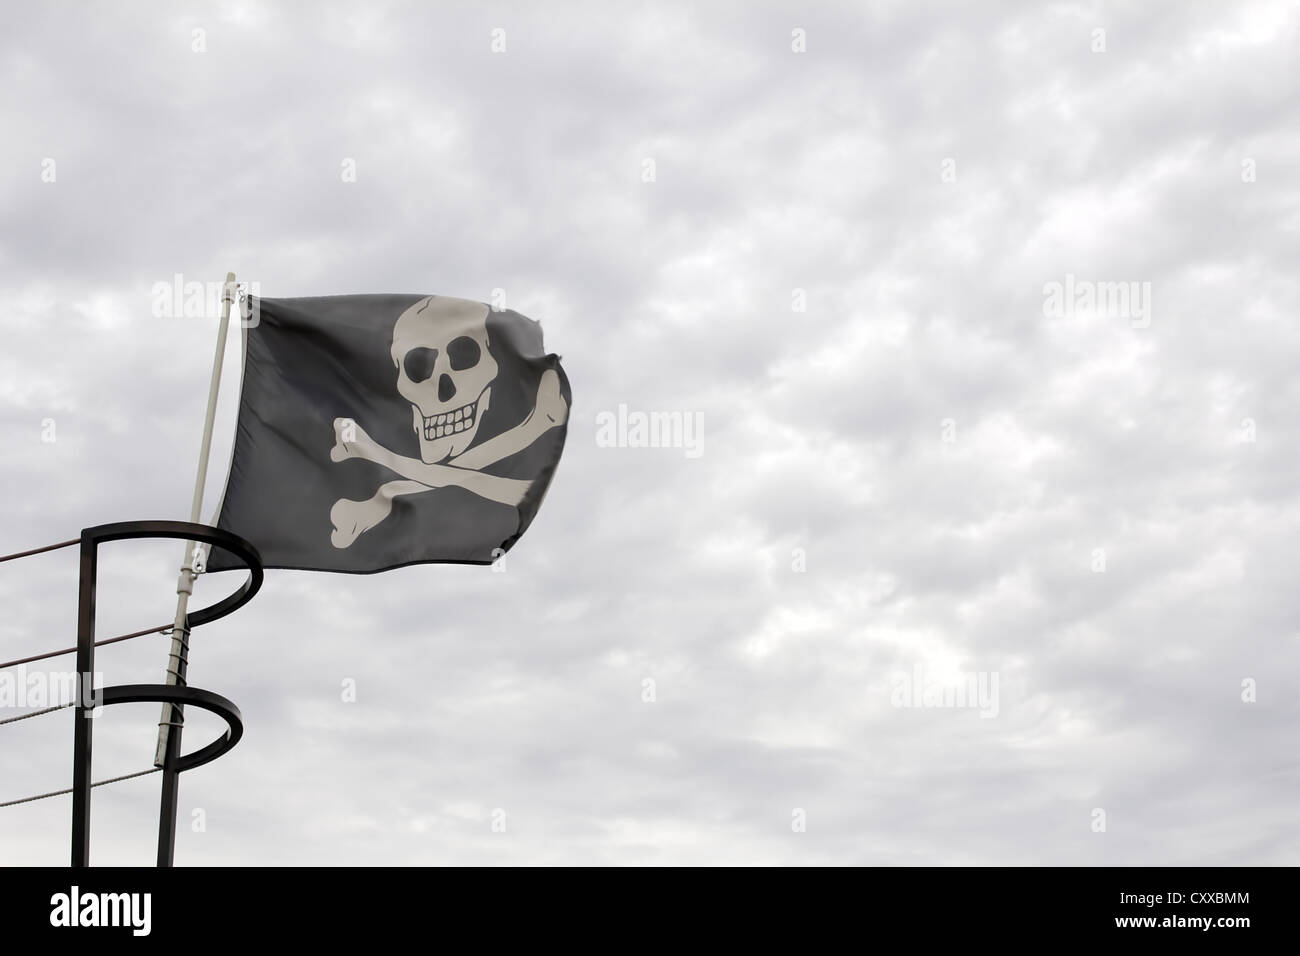 Pirate Ship Jolly Roger Skull with Crossbones Flag against Cloudy Sky Background Stock Photo